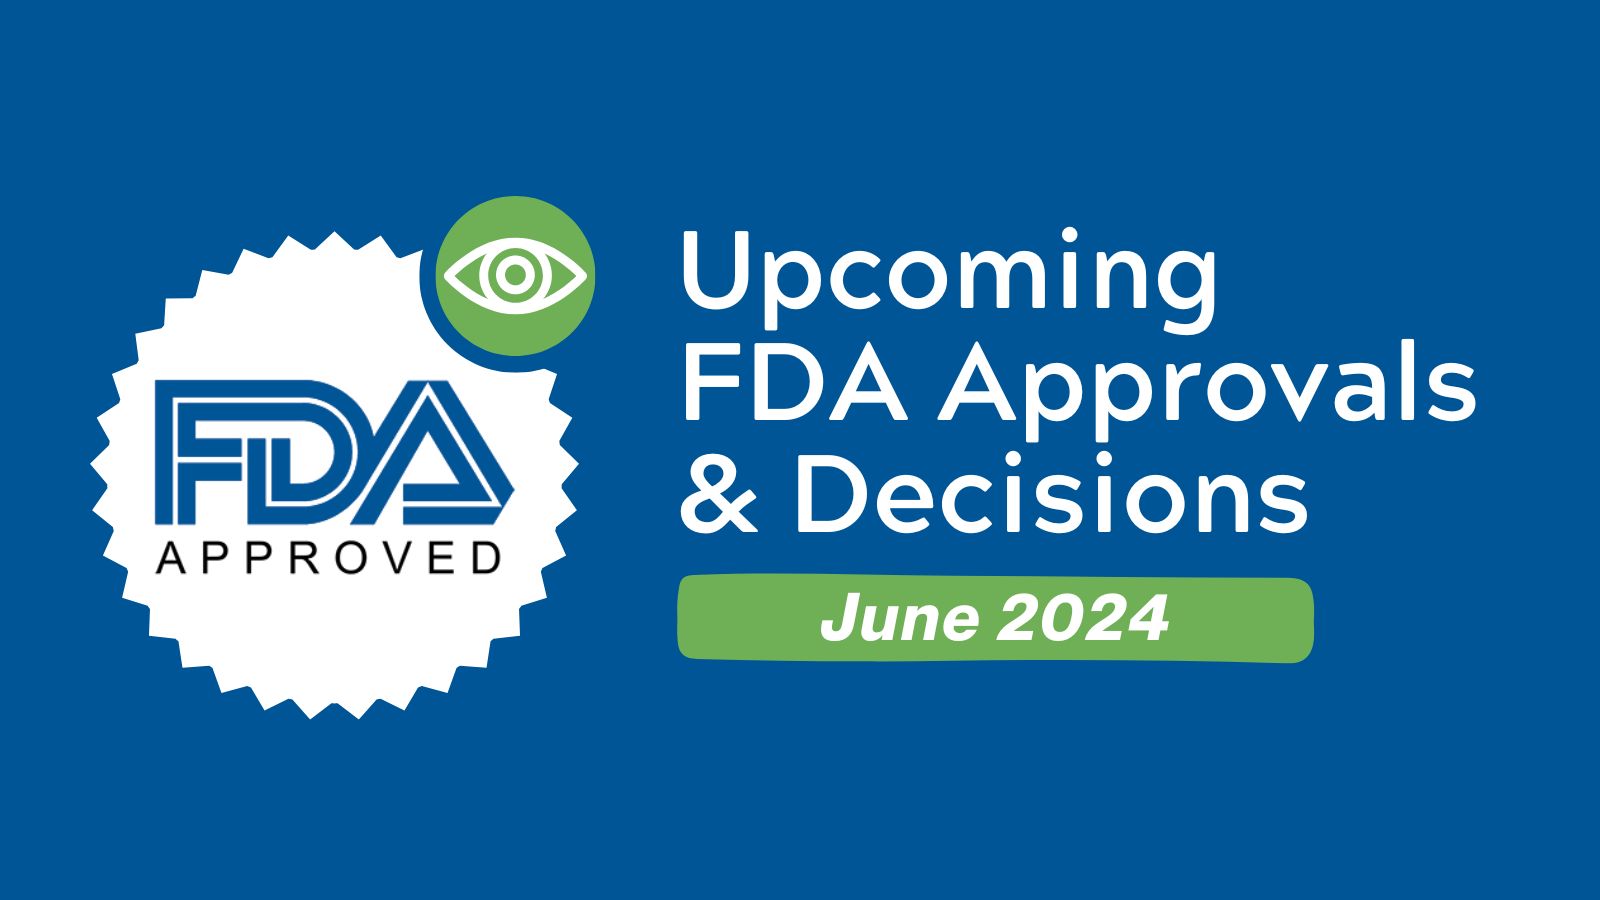 Upcoming FDA Approvals & Decisions - June 2024